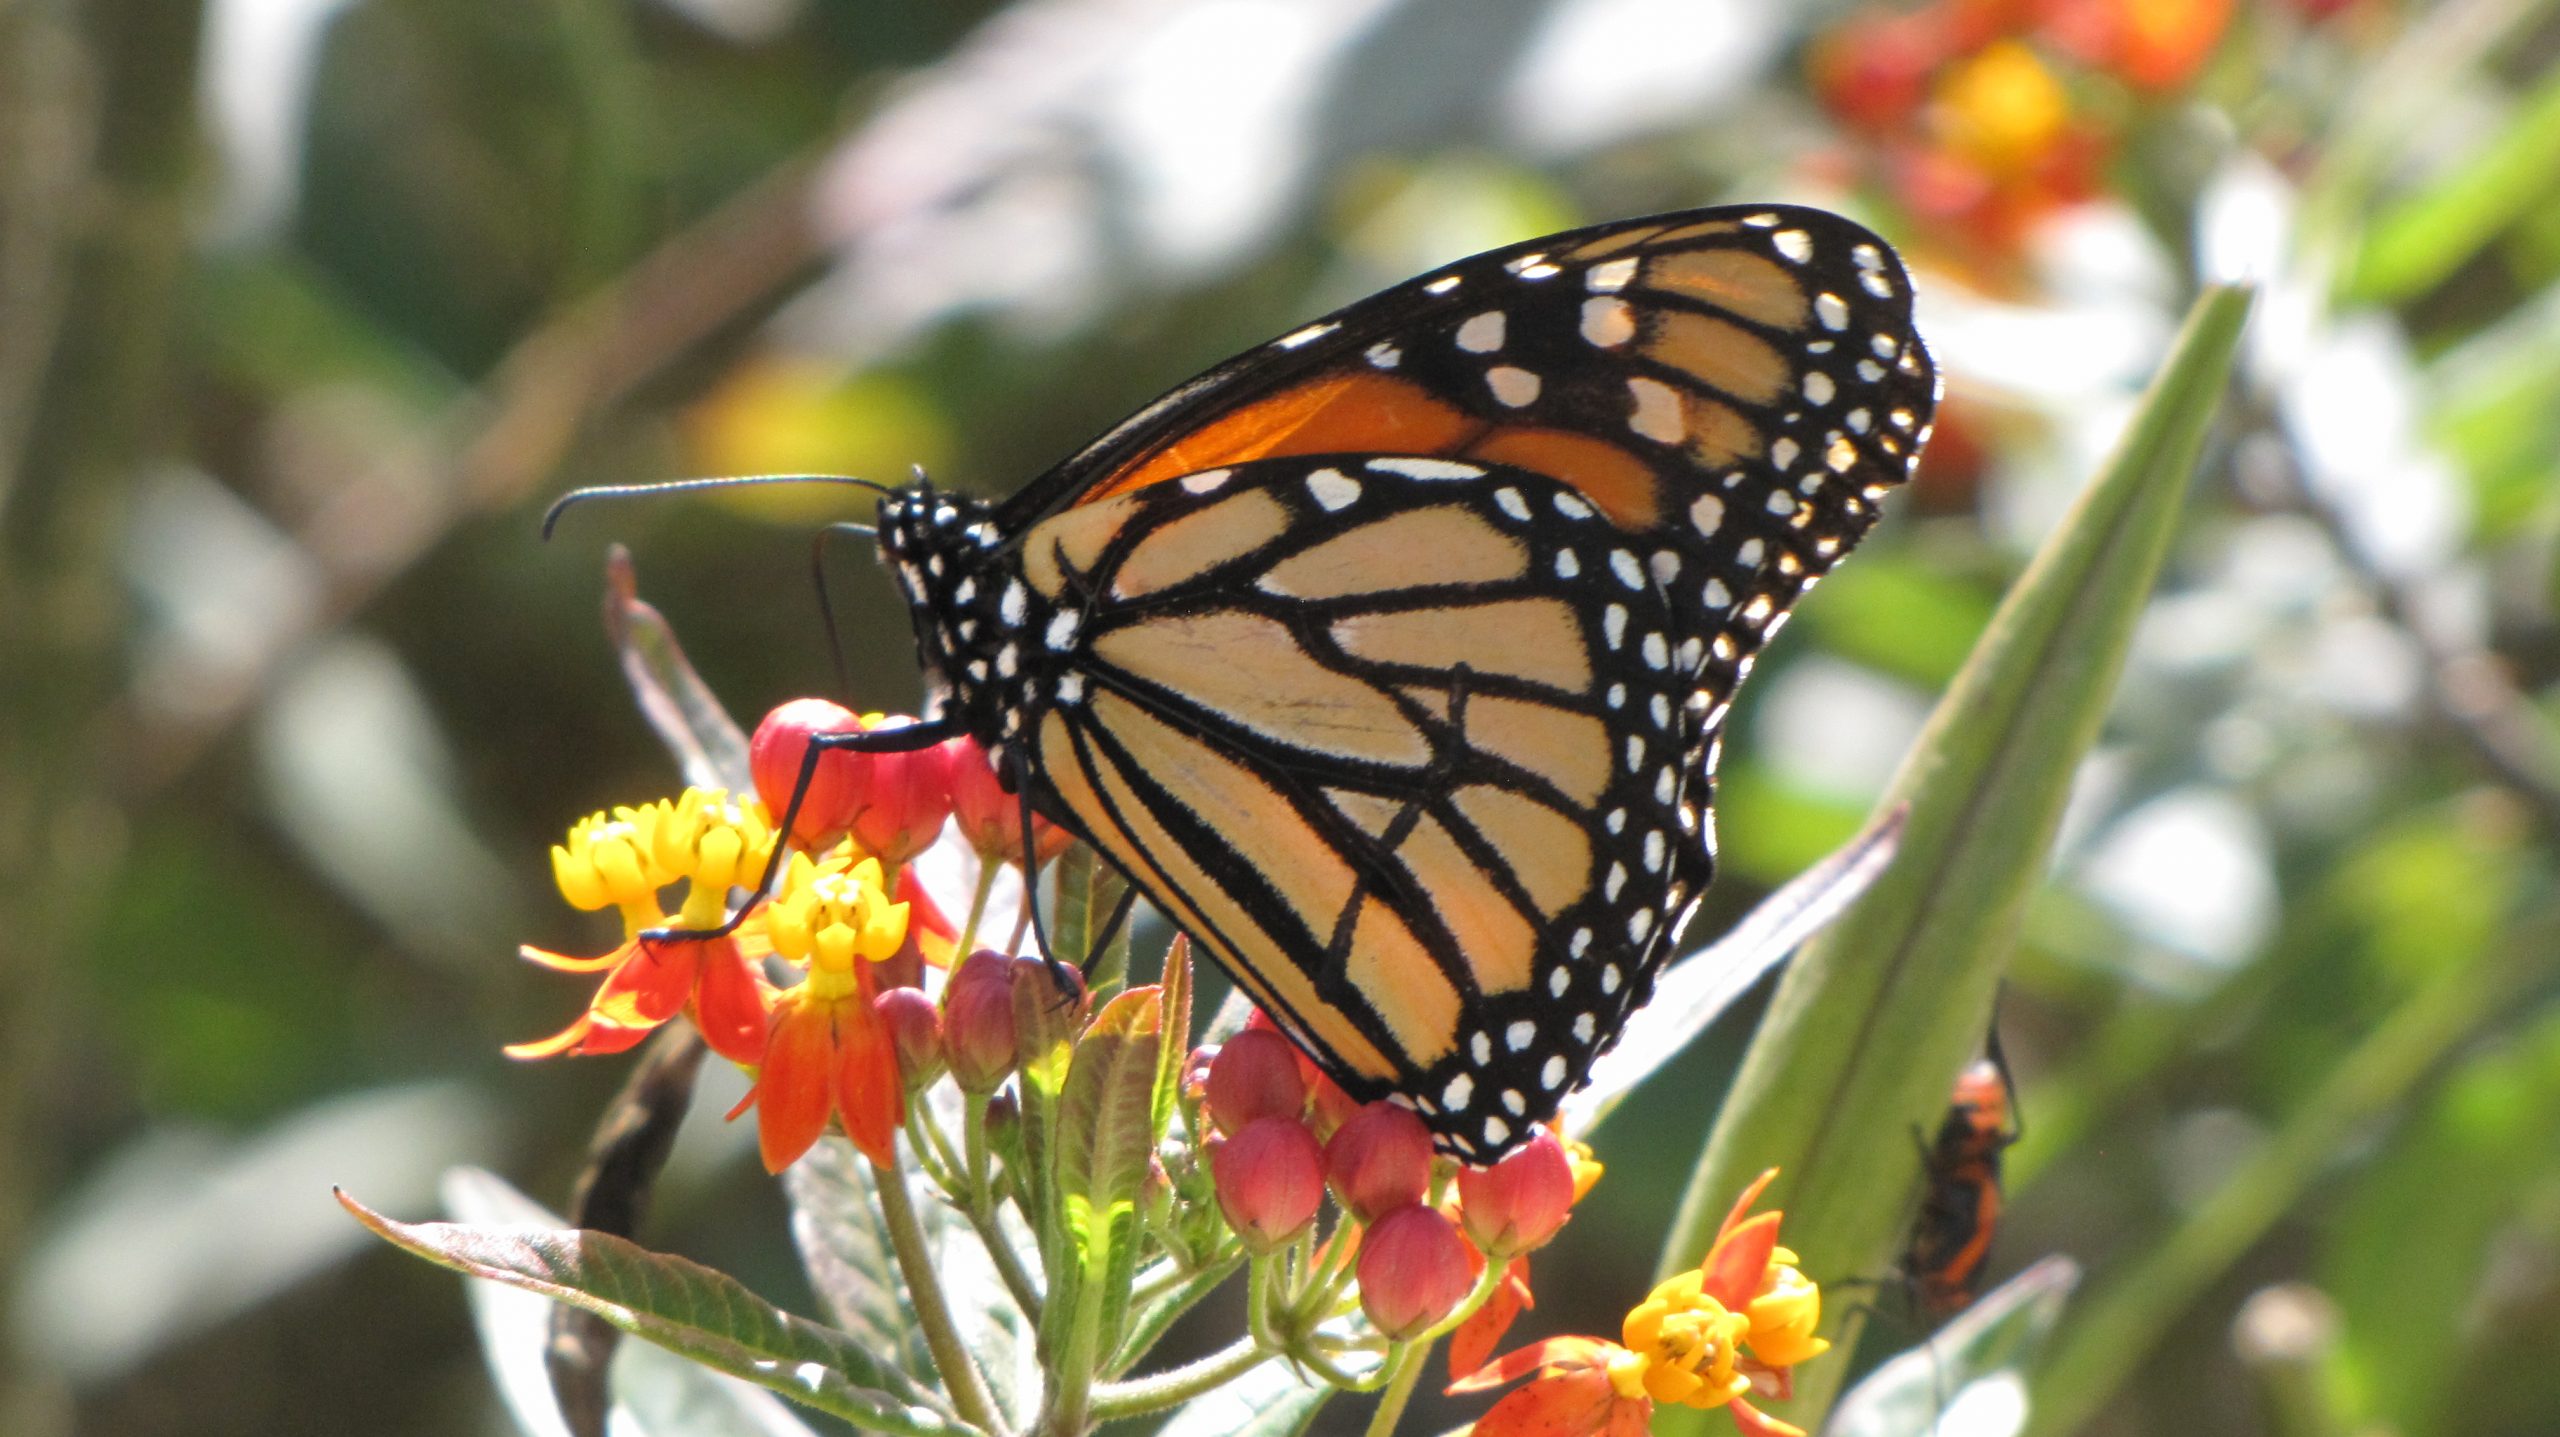 Monarch butterfly at the San Antonio River Milkweed Patch